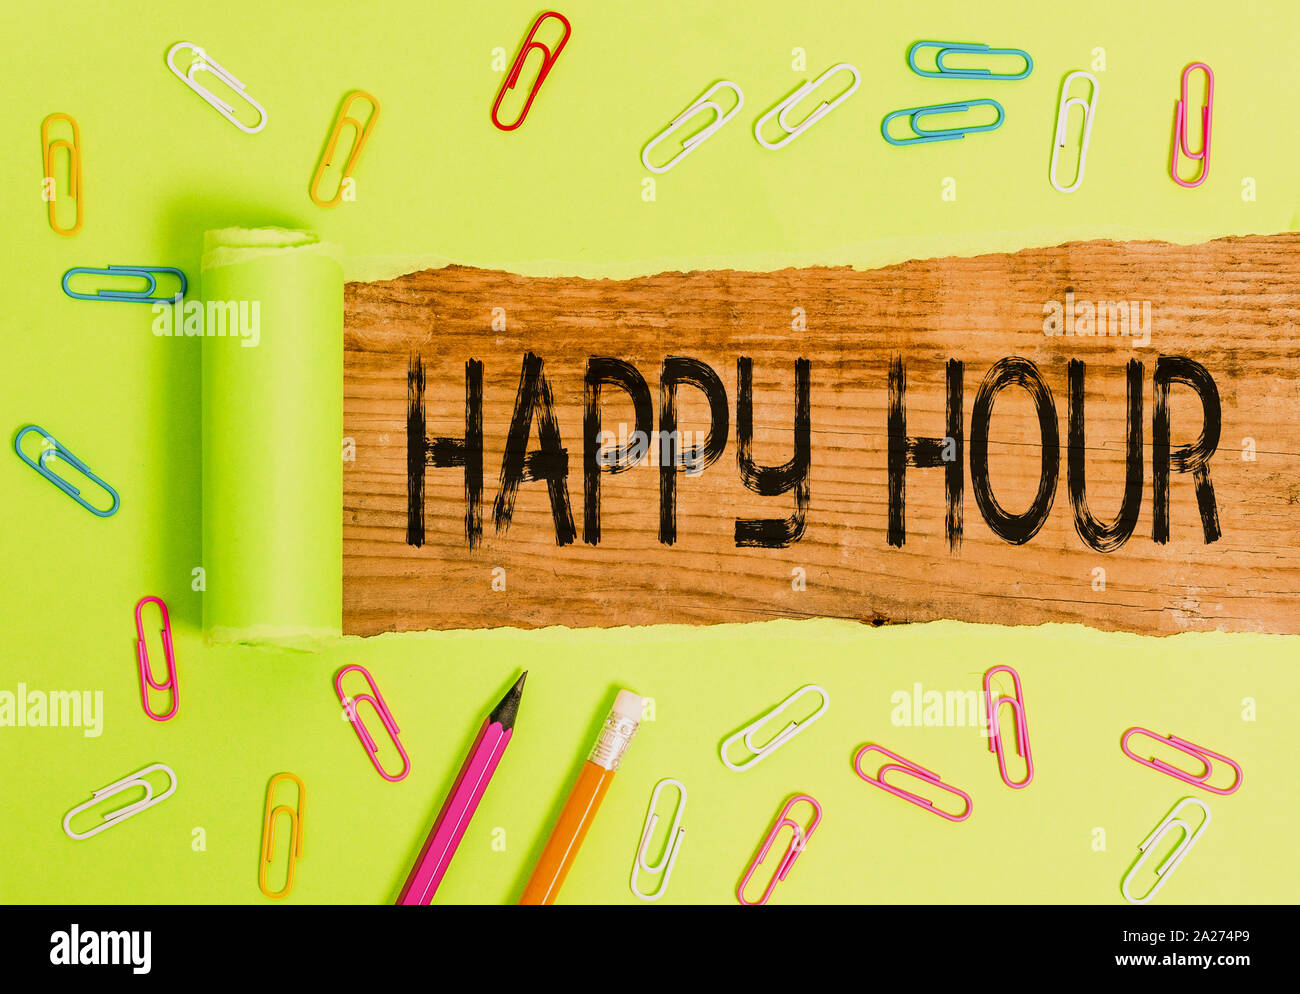 Conceptual hand writing showing Happy Hour. Concept meaning Spending time for activities that makes you relax for a while Stock Photo